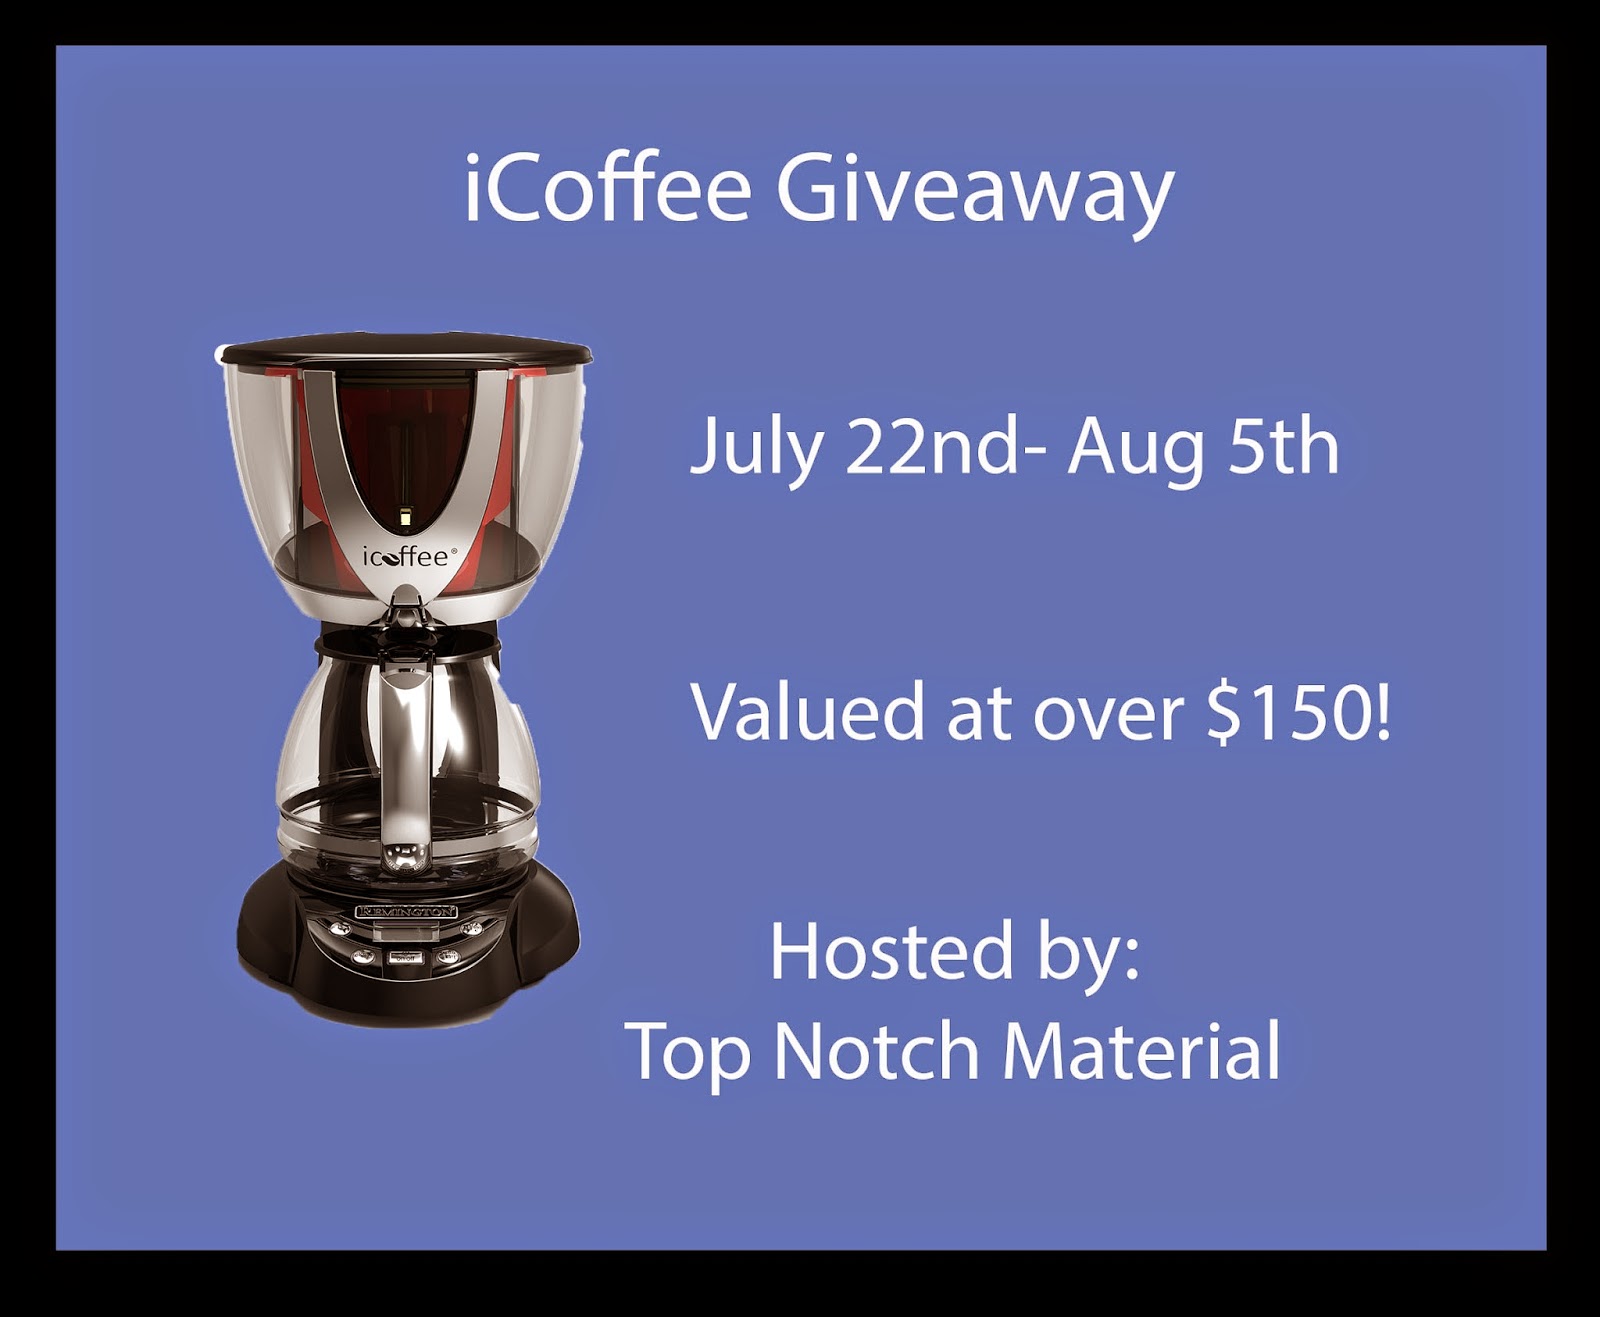 Enter the iCoffee SteamBrew Coffee Maker Giveaway by 8/5 for your chance to win this awesome prize